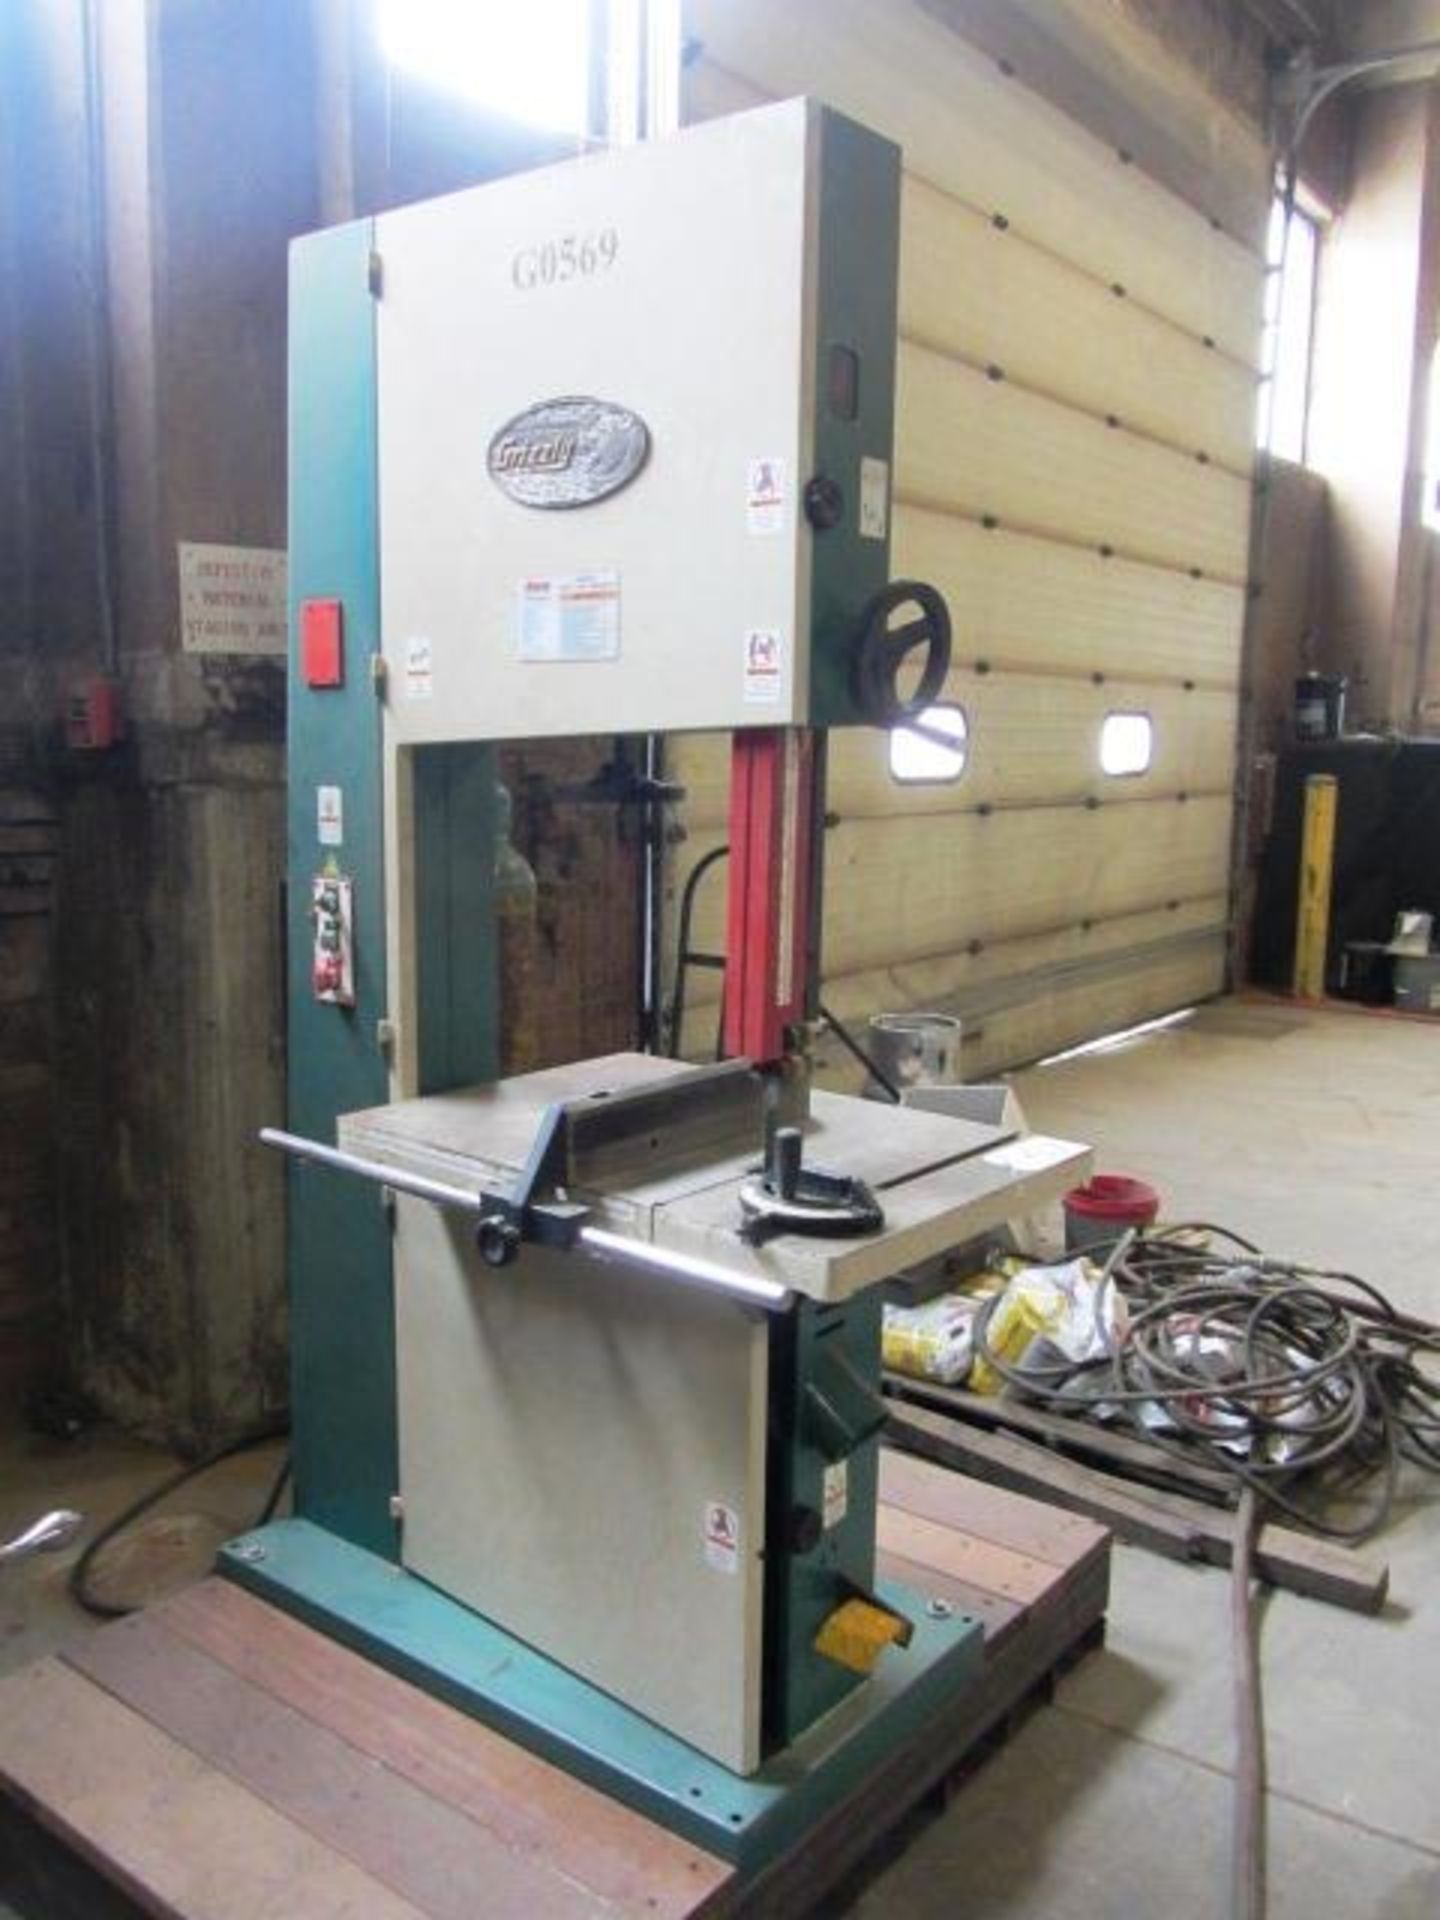 Grizzly G0569 24'' Heavy Duty Bandsaw, sn:0070006